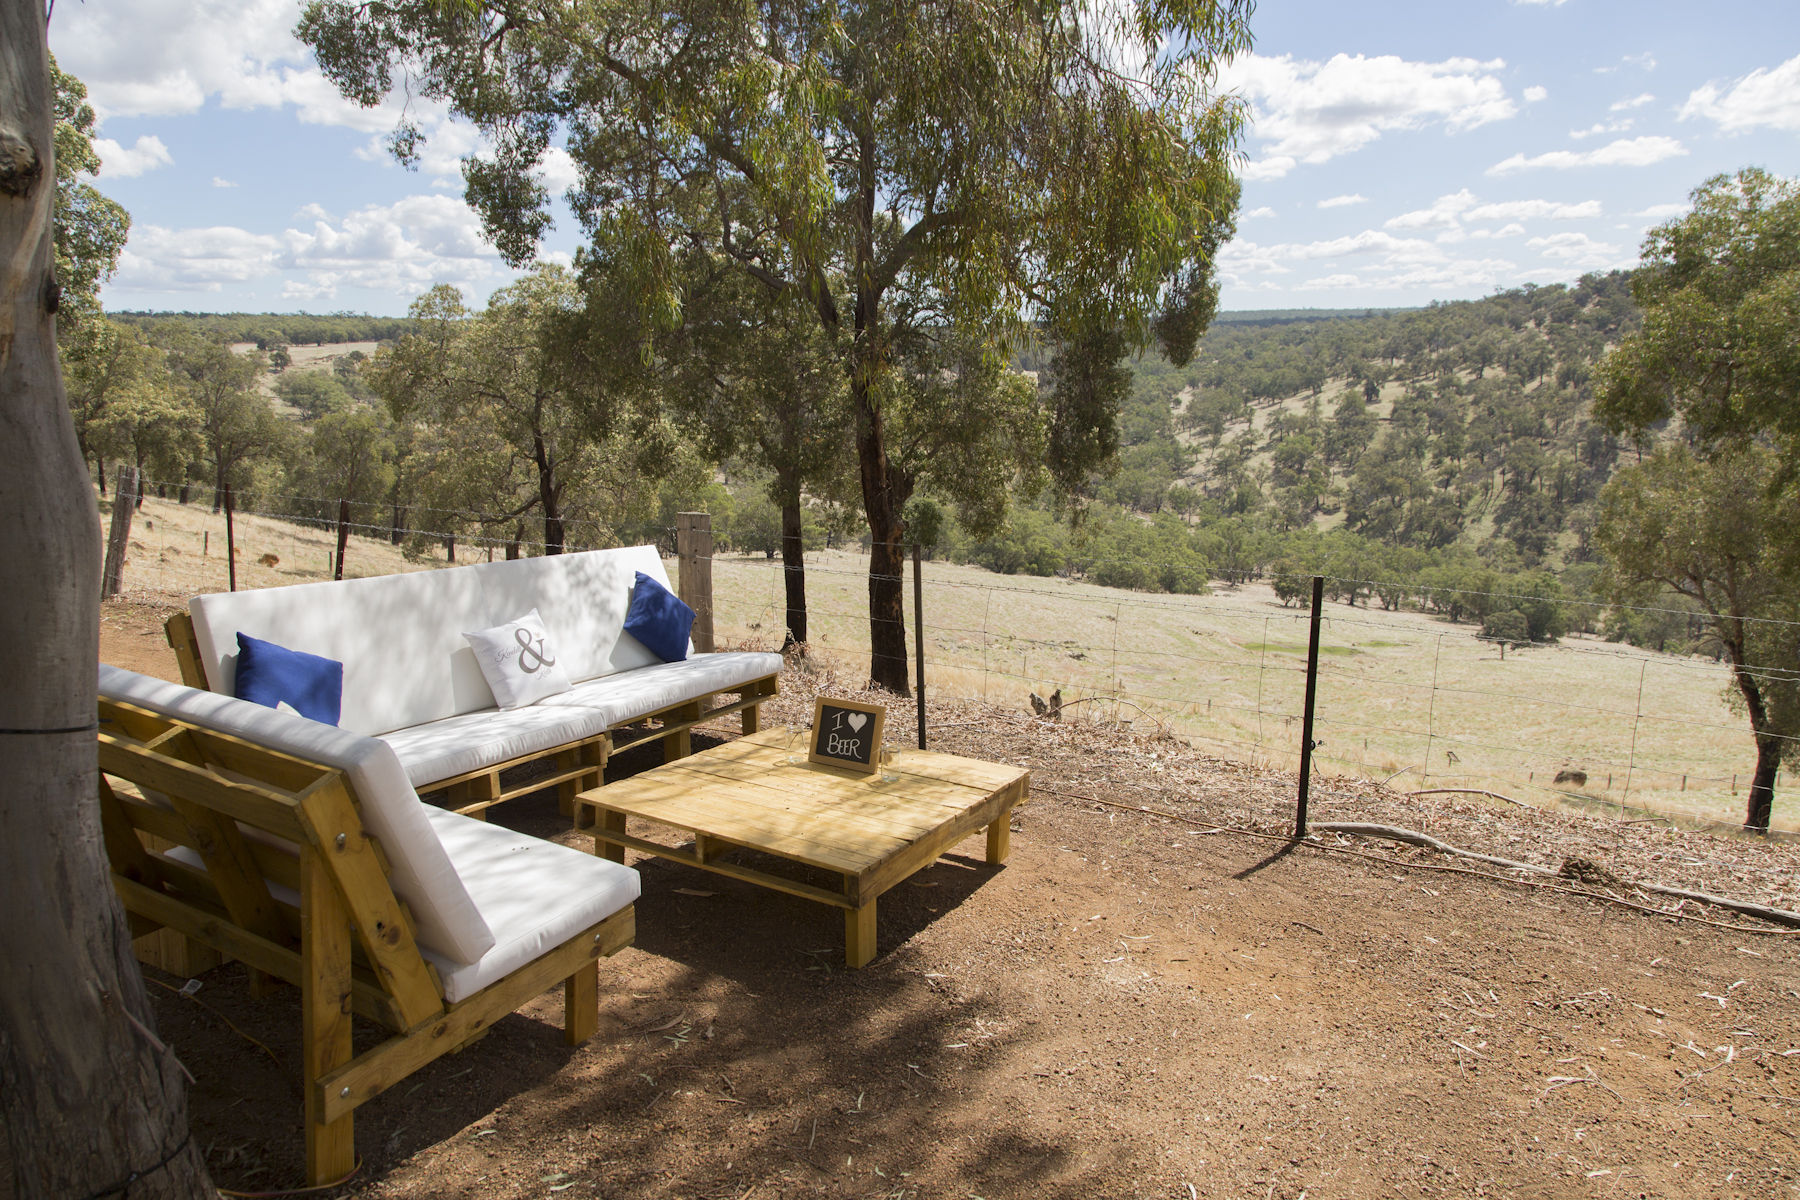 outdoor pallet furniture hire perth <a href='#' class='view-taggged-products' data-id=3275>Click to View Products</a><div class='taggged-products-slider-wrap'><div class='heading-tag-products'></div><div class='taggged-products-slider'></div></div><div class='loading-spinner'><i class='fa fa-spinner fa-spin'></i></div>